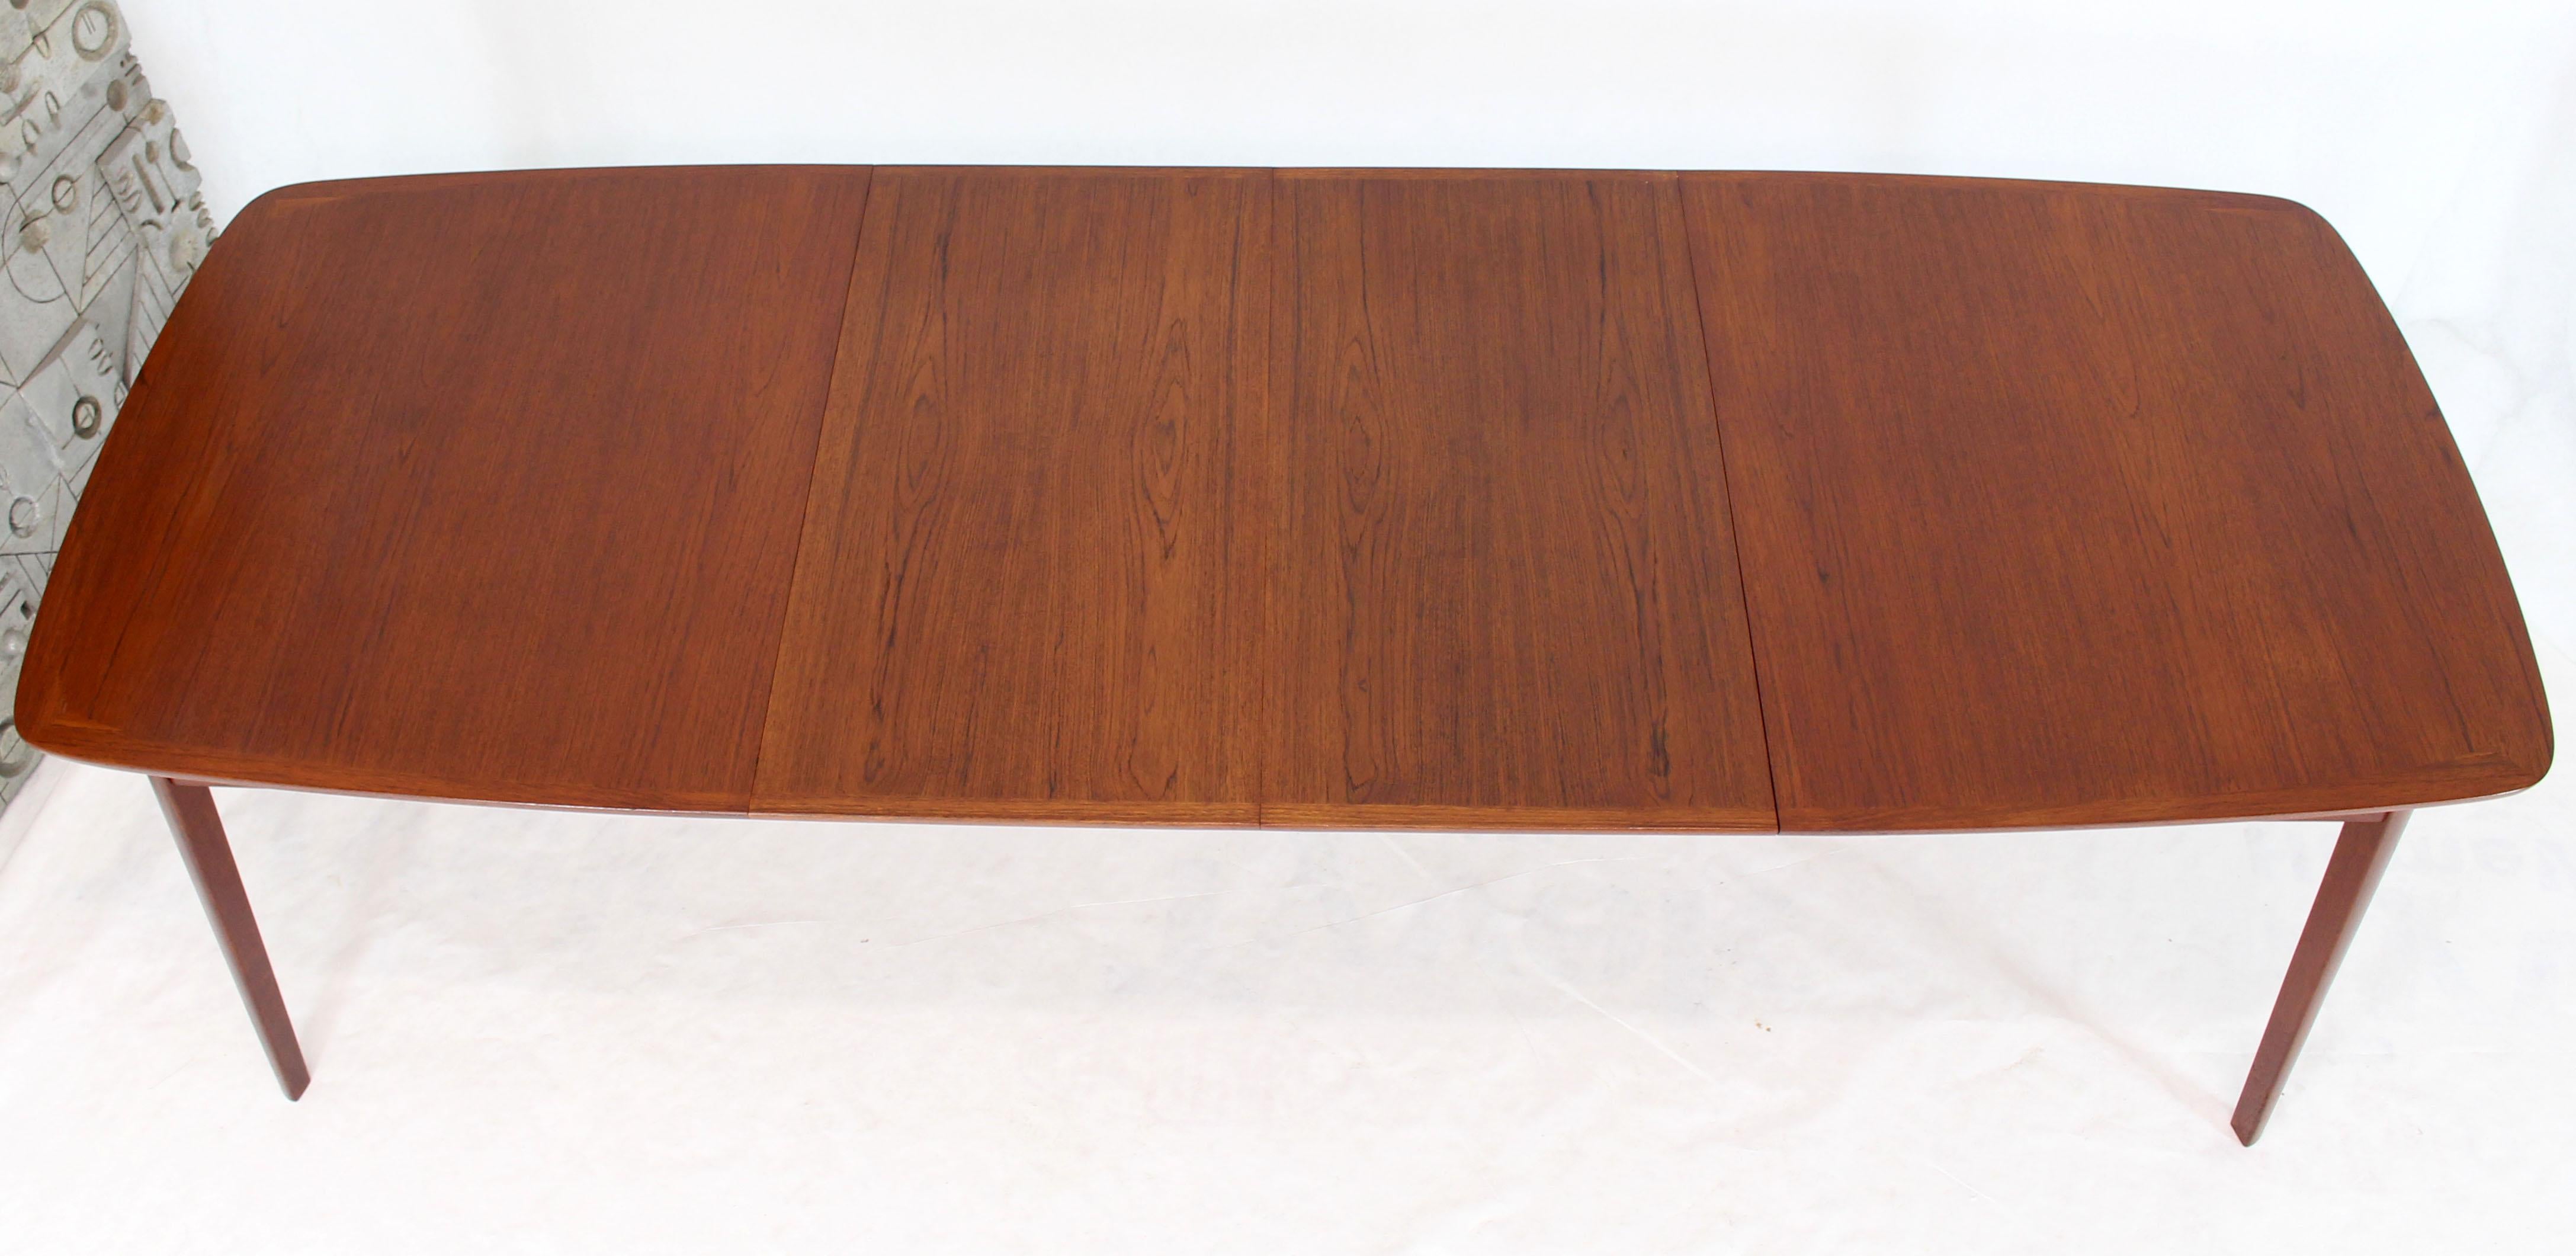 Danish Teak Mid-Century Modern Dining Banquet Table Self Storing Folding Leafs In Excellent Condition For Sale In Rockaway, NJ